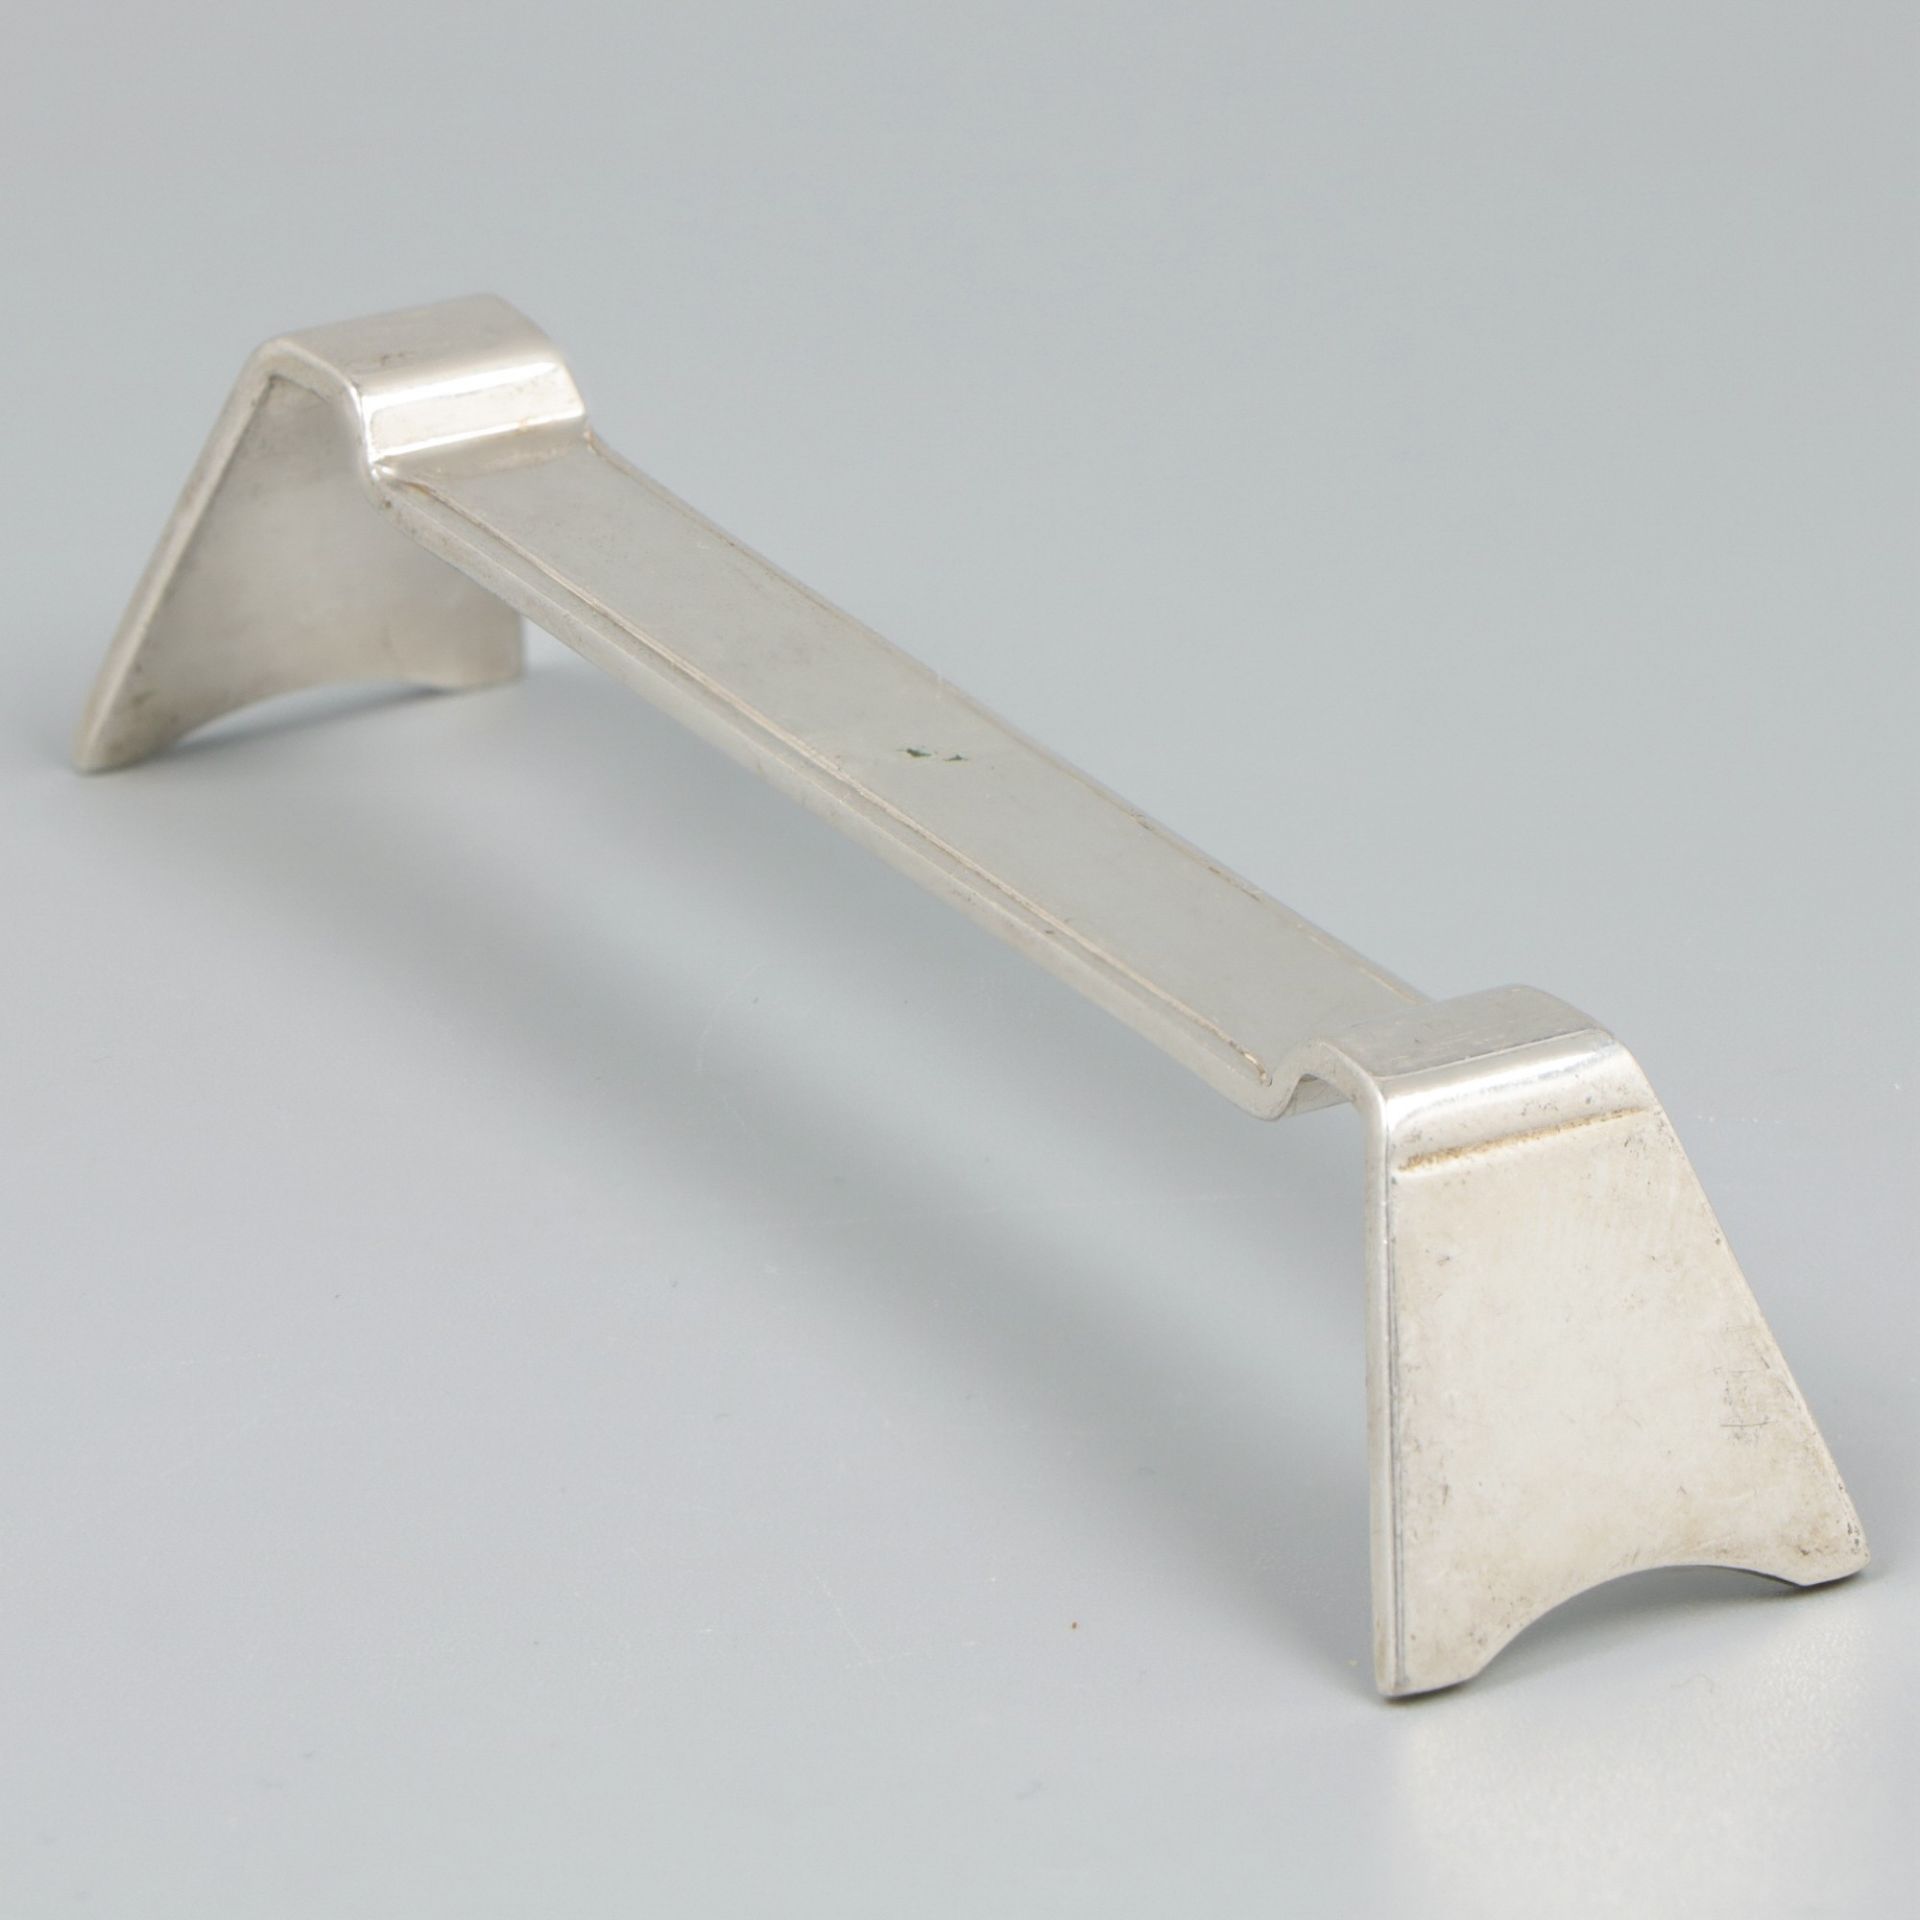 6-piece set of silver knife rests. - Image 4 of 5